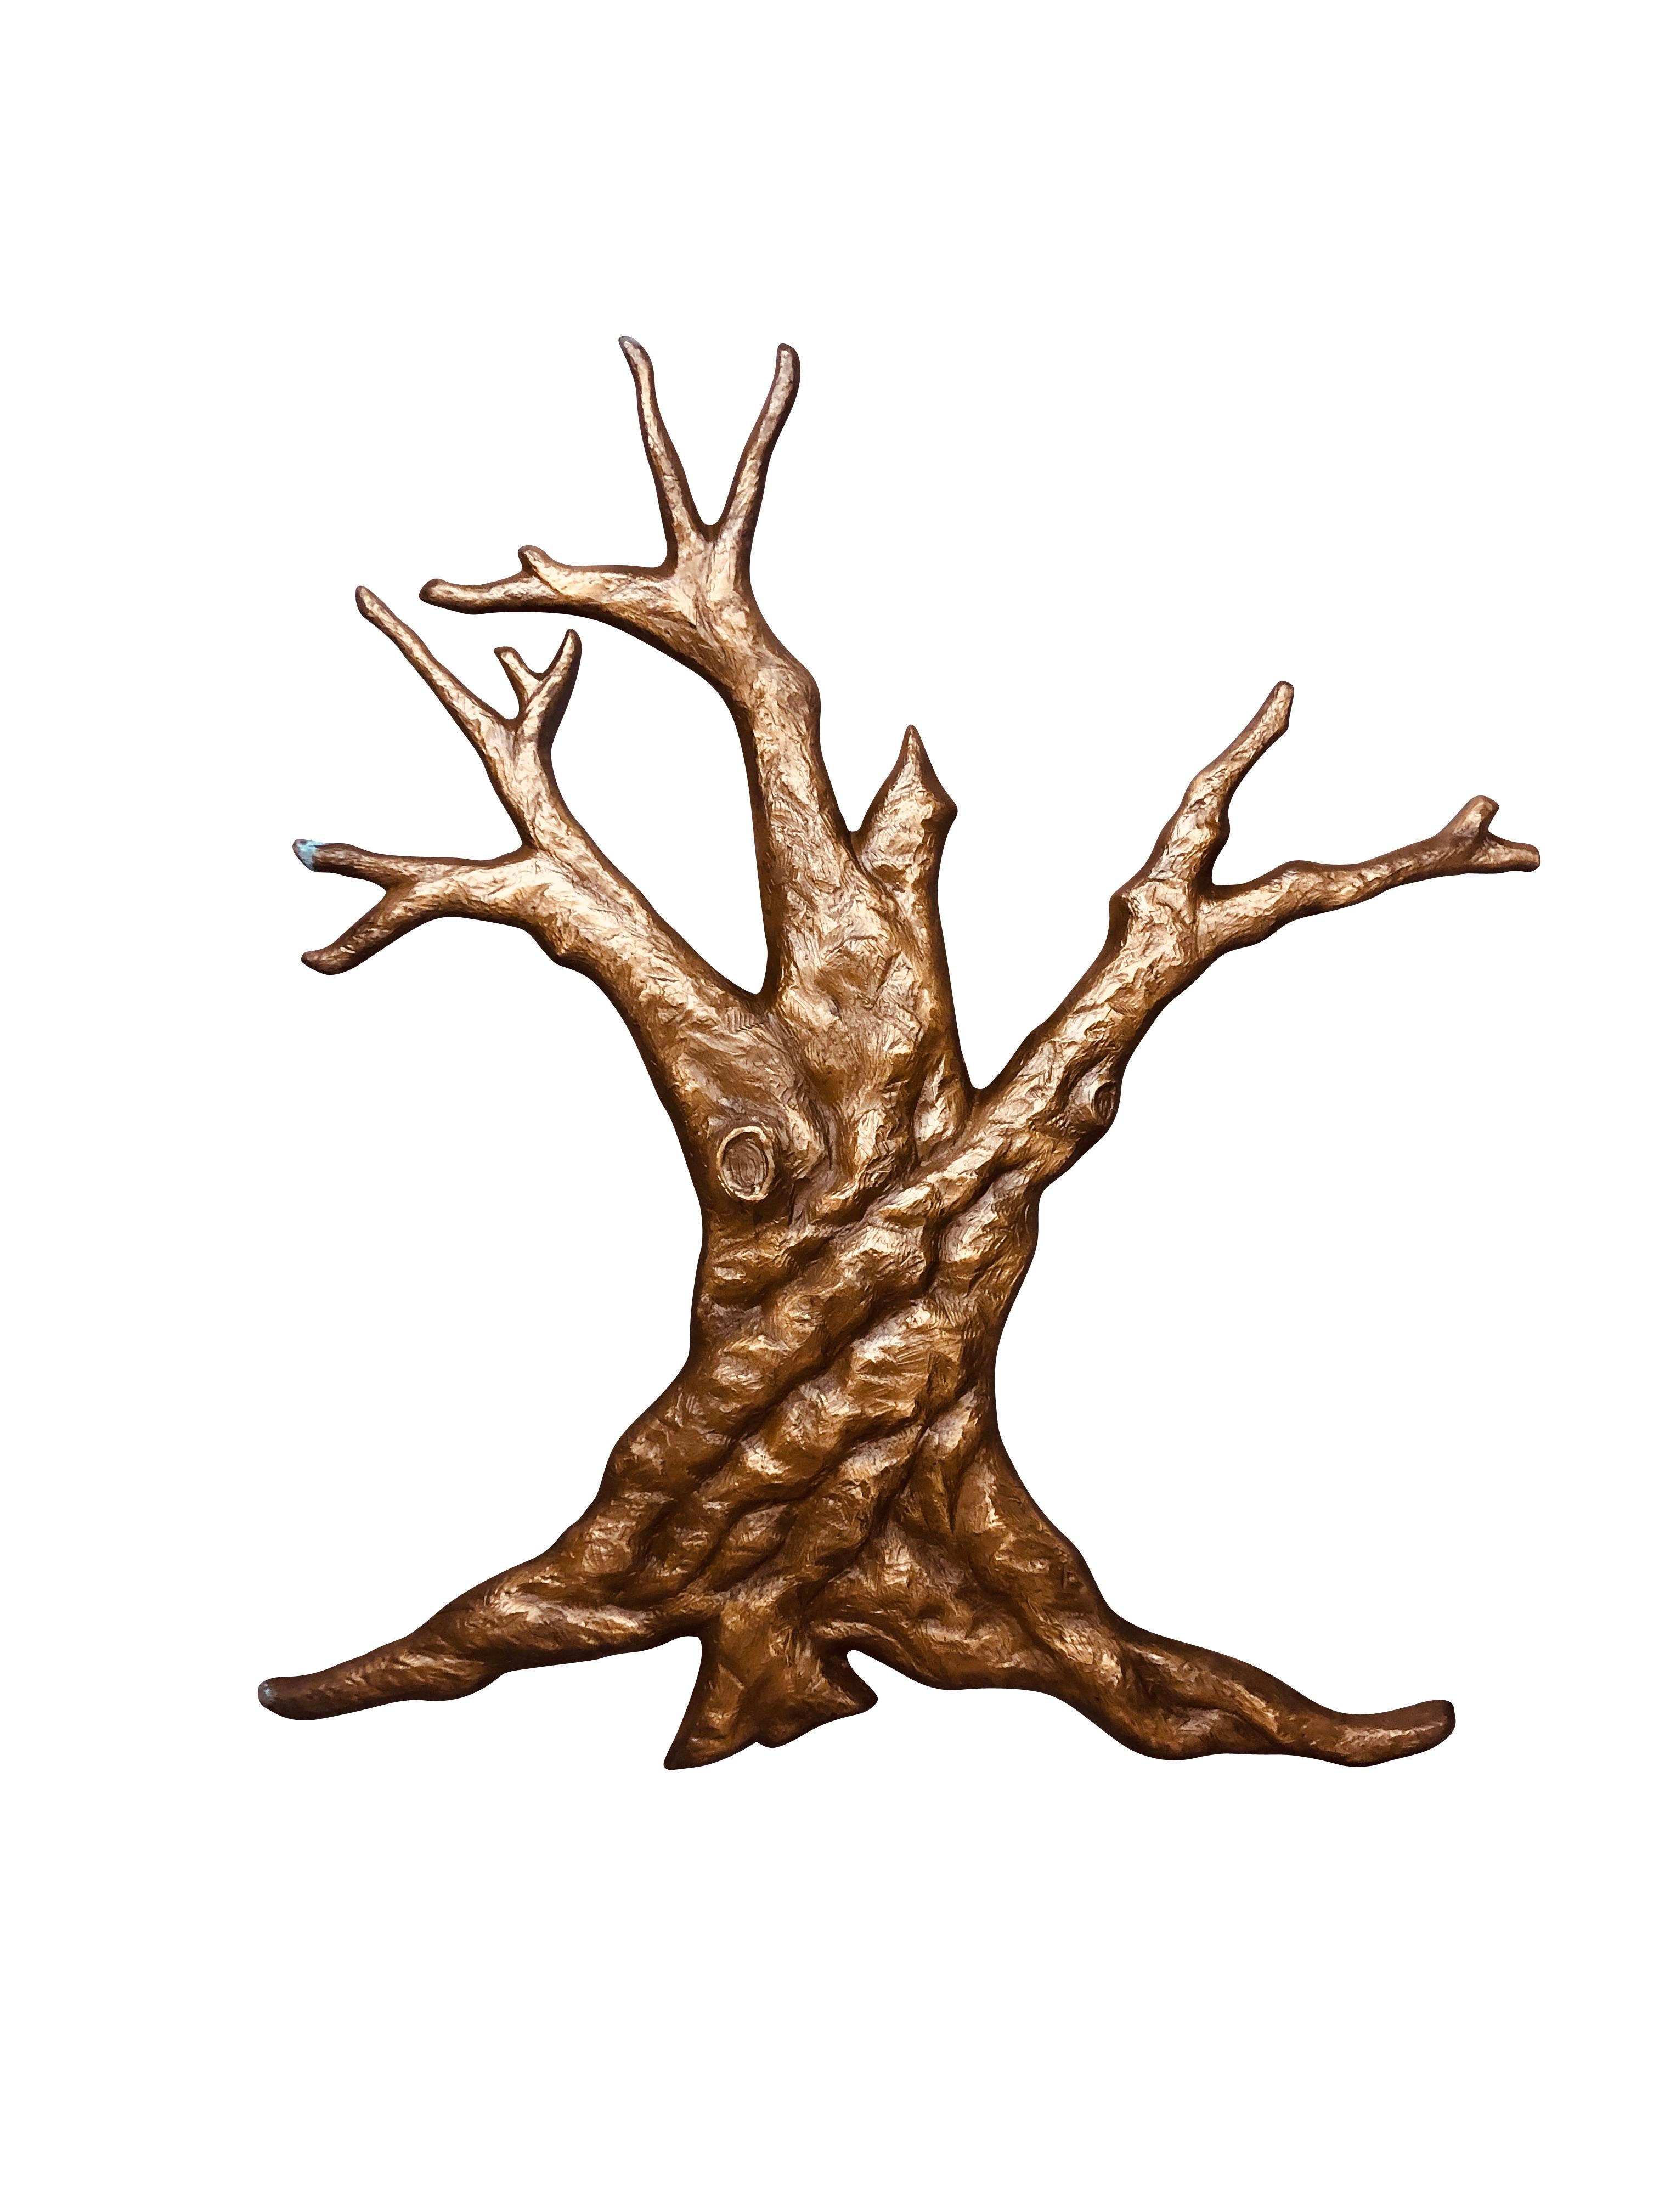 Natural bronze tree midcentury 1950s garden wall sculpture measuring 48 inches high by 39 inches wide by 1.25 inches in depth. Lifelike tree form sculpture of tree root and trunk with finely incised detail of tree bark. Fabulous natural wall